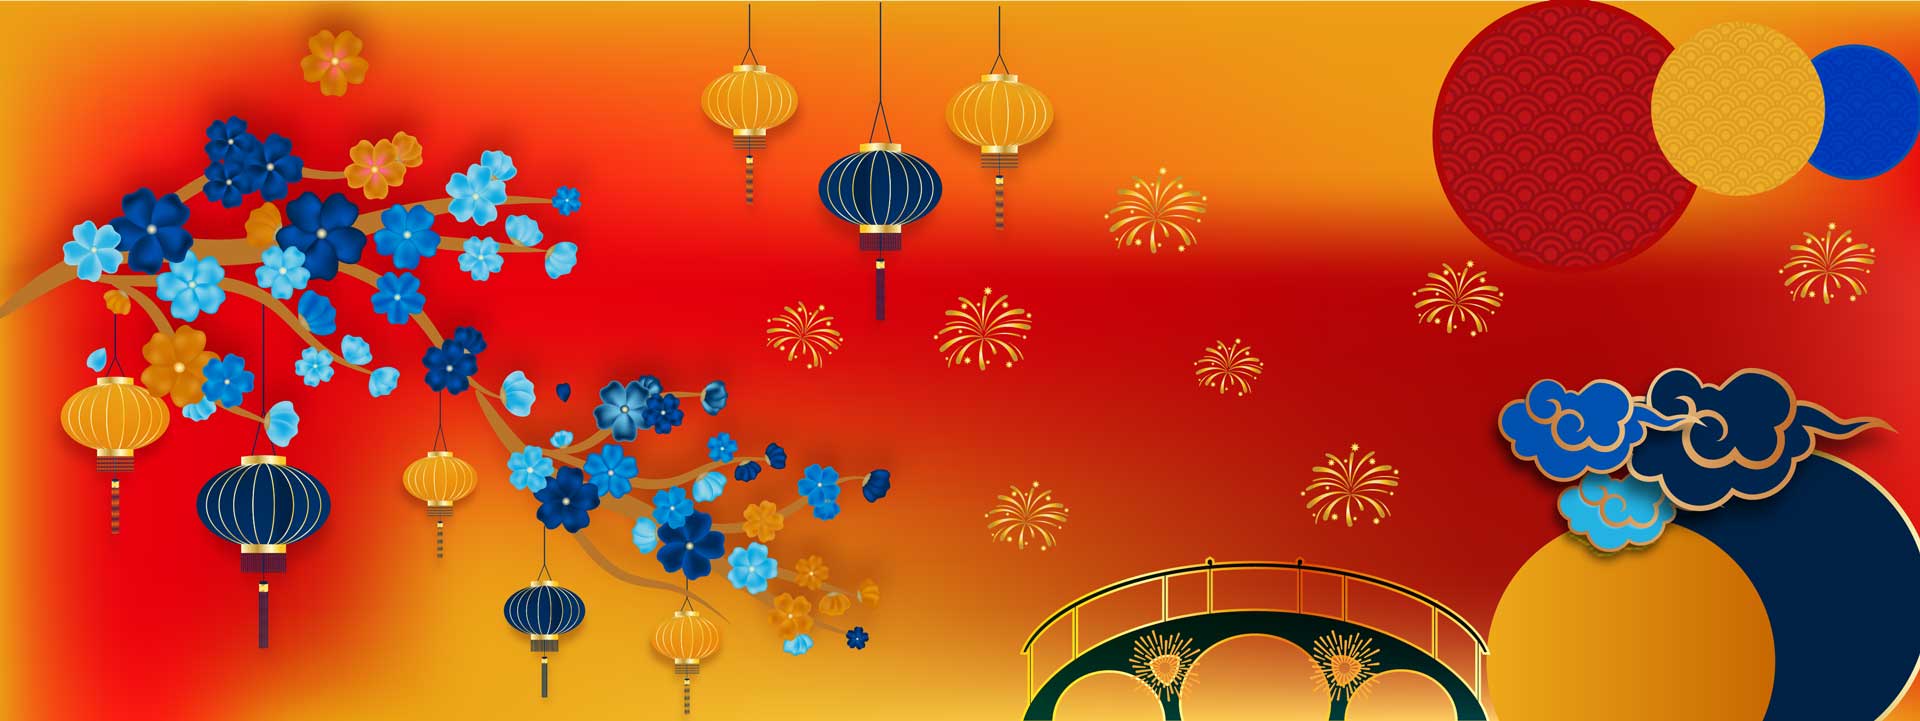 Lunar New Year collage with a illustrations of blossoms, lanterns, and fireworks.